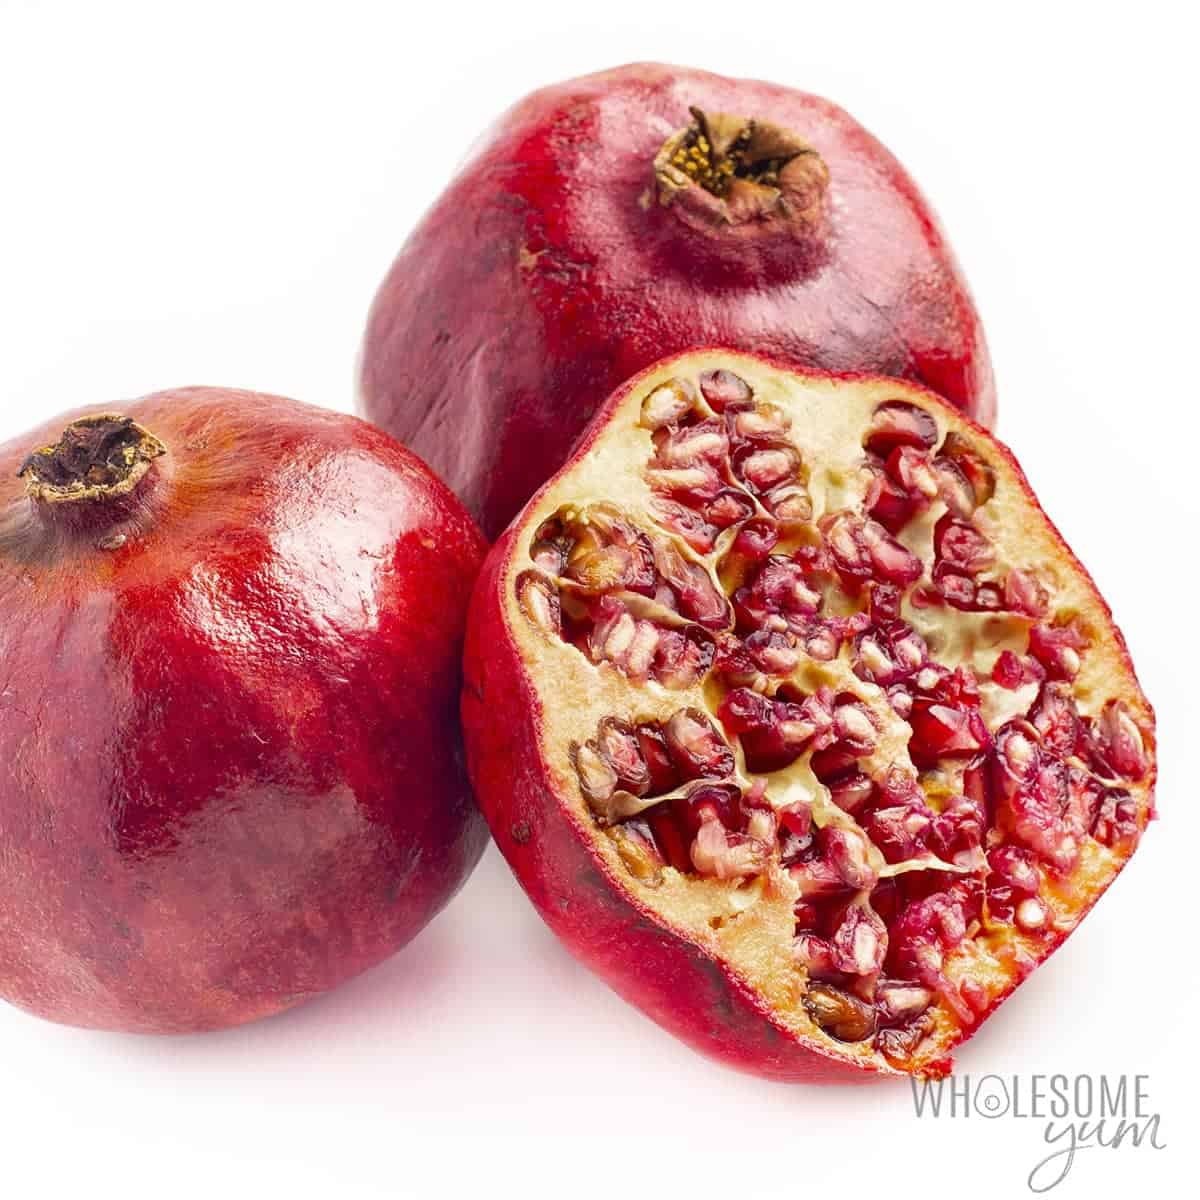 Is pomegranate keto? How high are pomegranate carbs? Learn the answers here, plus how to enjoy them on a keto diet.